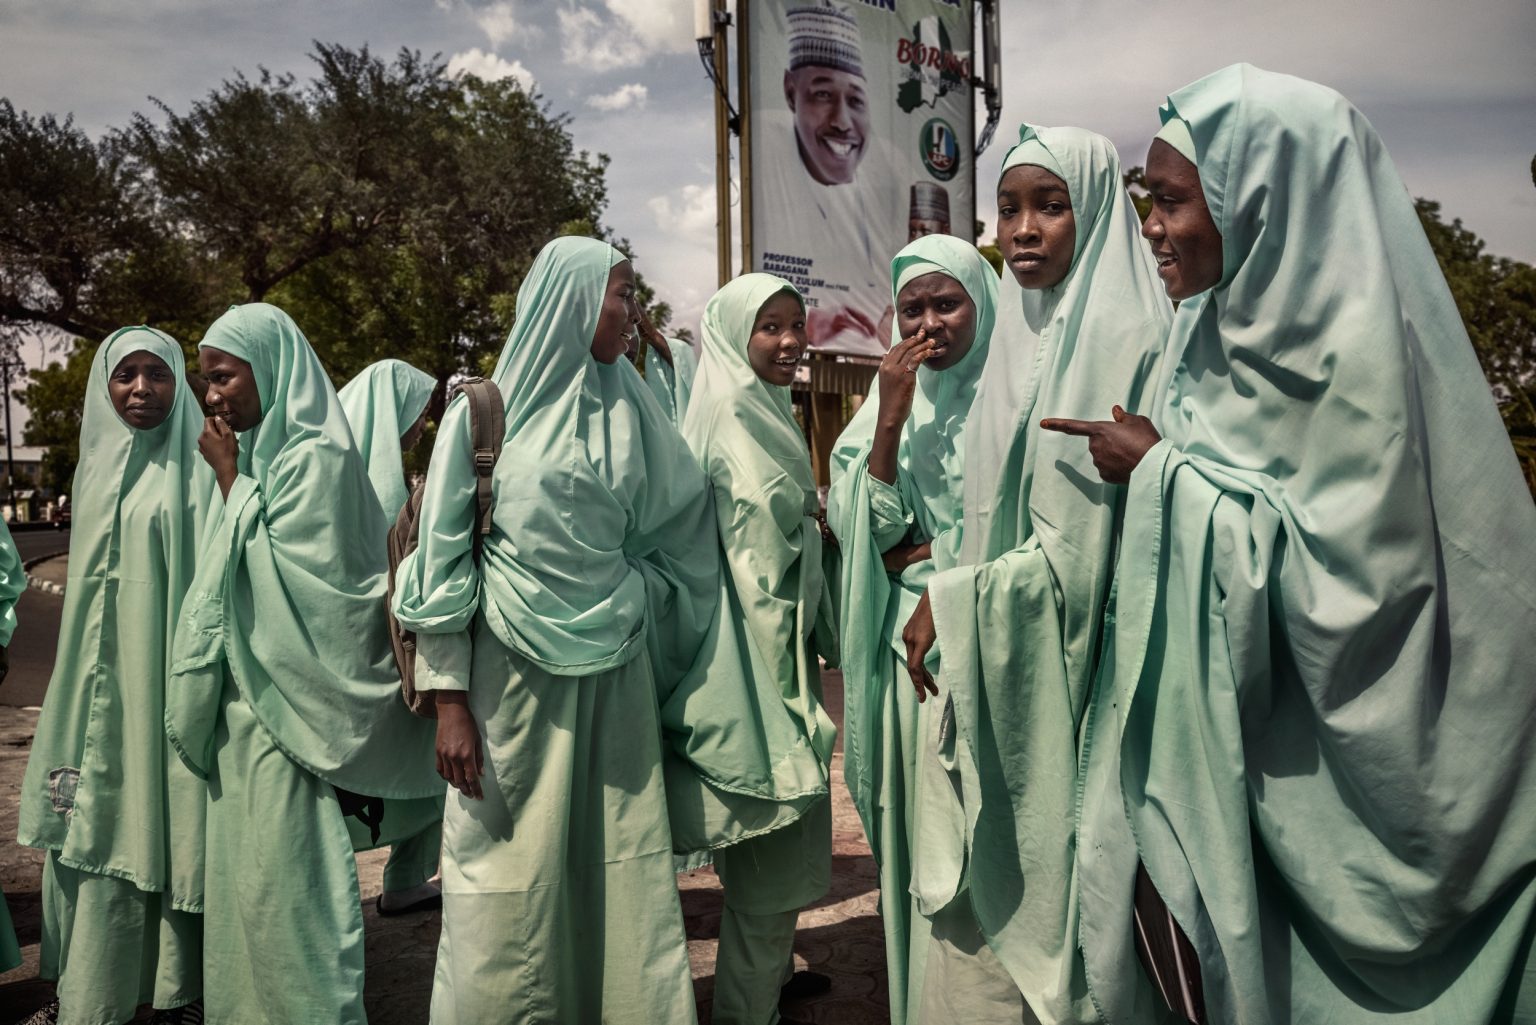 Maiduguri, Nigeria, Africa, May 2021 - Some female students are gathiering afte school. Designated as a terrorist group in the United States in 2013, Boko Haram gained international importance in April 2014, when its militants kidnapped 276 schoolgirls from their dorms in Chibok, a mainly Christian town located about 80 miles from Maiduguri, capital city of Borno State.
Despite on the 20 of May Abubakar Shekau might have killed himself in order not to be caught from the new jihadist secessionist group affiliated with ISIS, called Iswap (Islamic State West Africa Province), Boko Haram keeps on being a threat in the entire Lake Chad area, which includes north-western Nigeria, remaining deadly as always. ><
Maiduguri, Nigeria, Africa, maggio 2021 -  Alcune studentesse si rtorvano dopo scuola. Designato gruppo terroristico dagli Stati Uniti nel 2013, Boko Haram ha guadagnato importanza internazionale nell'aprile 2014, quando i suoi militanti hanno rapito 276 studentesse dai loro dormitori a Chibok, una città prevalentemente cristiana a circa 80 miglia da Maiduguri, la capitale dello stato di Borno. Nonostante il 20 maggio Abubakar Shekau si sarebbe suicidato per non essere catturato dai militanti del nuovo gruppo jihadista secessionista affiliato allIsis,  chiamato Iswap (Islamic State West Africa Province),  Boko Haram rimane una minaccia nell'intera regione del Lago Ciad, che include la Nigeria nordorientale, rimanendo  "letale come sempre.